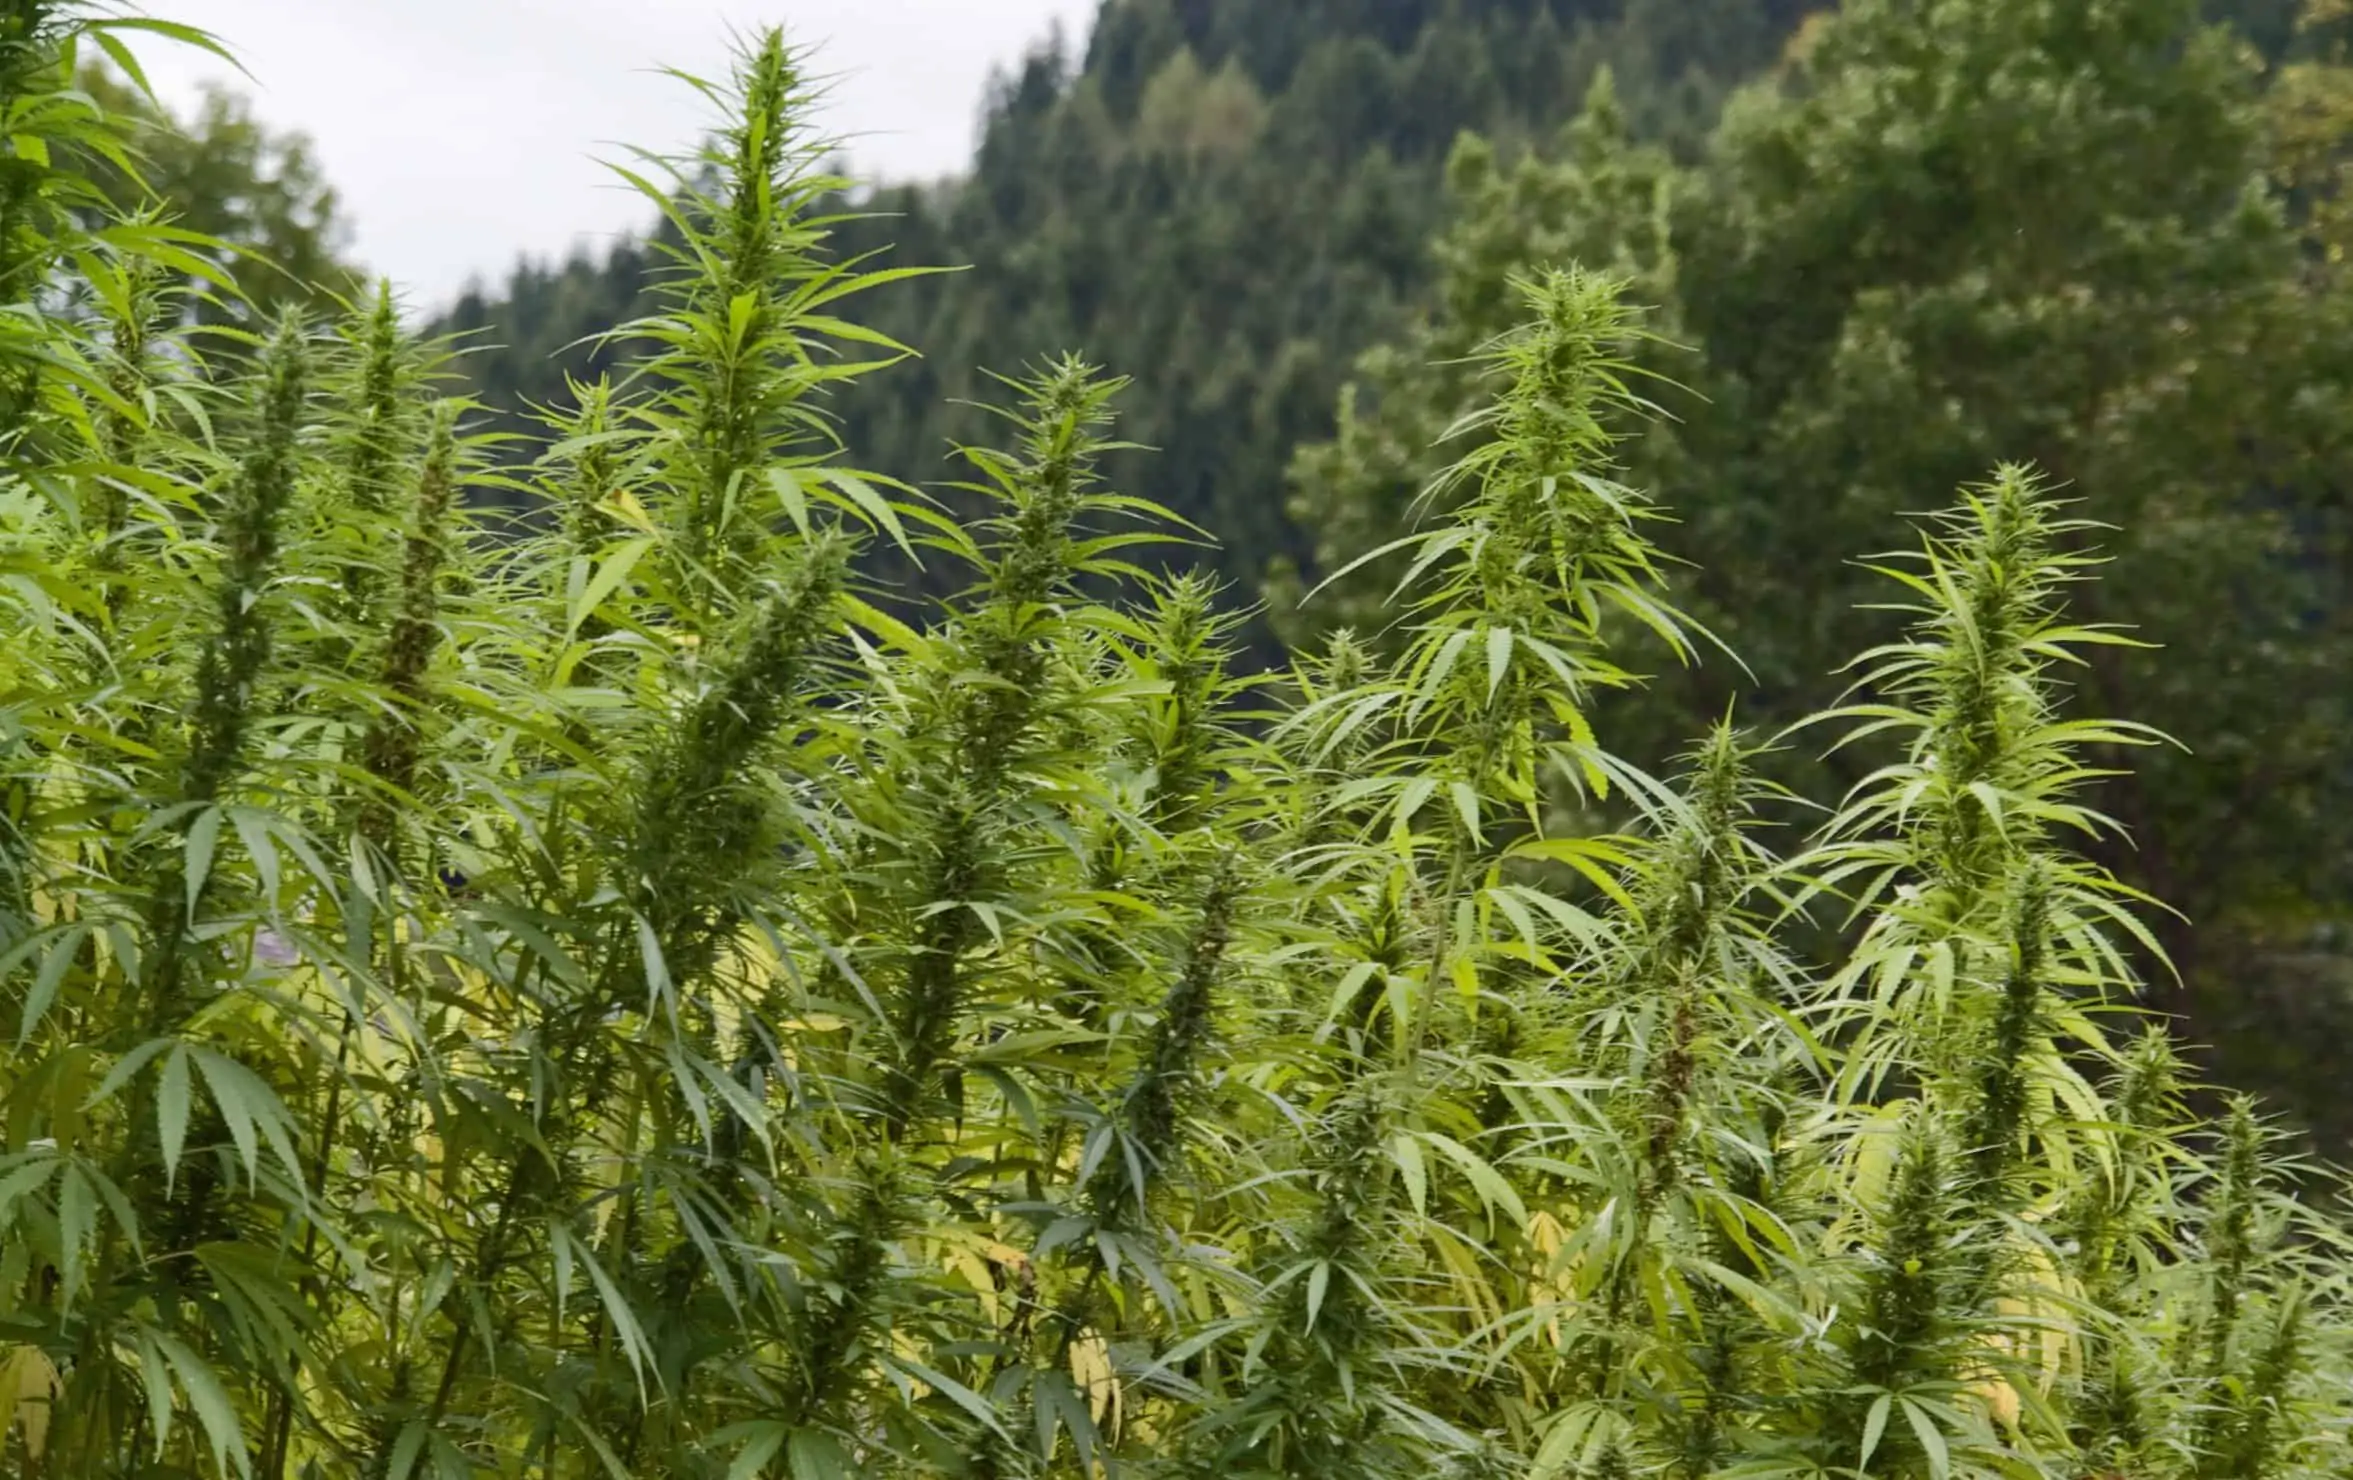 Growing Hemp in 2019: What To Know